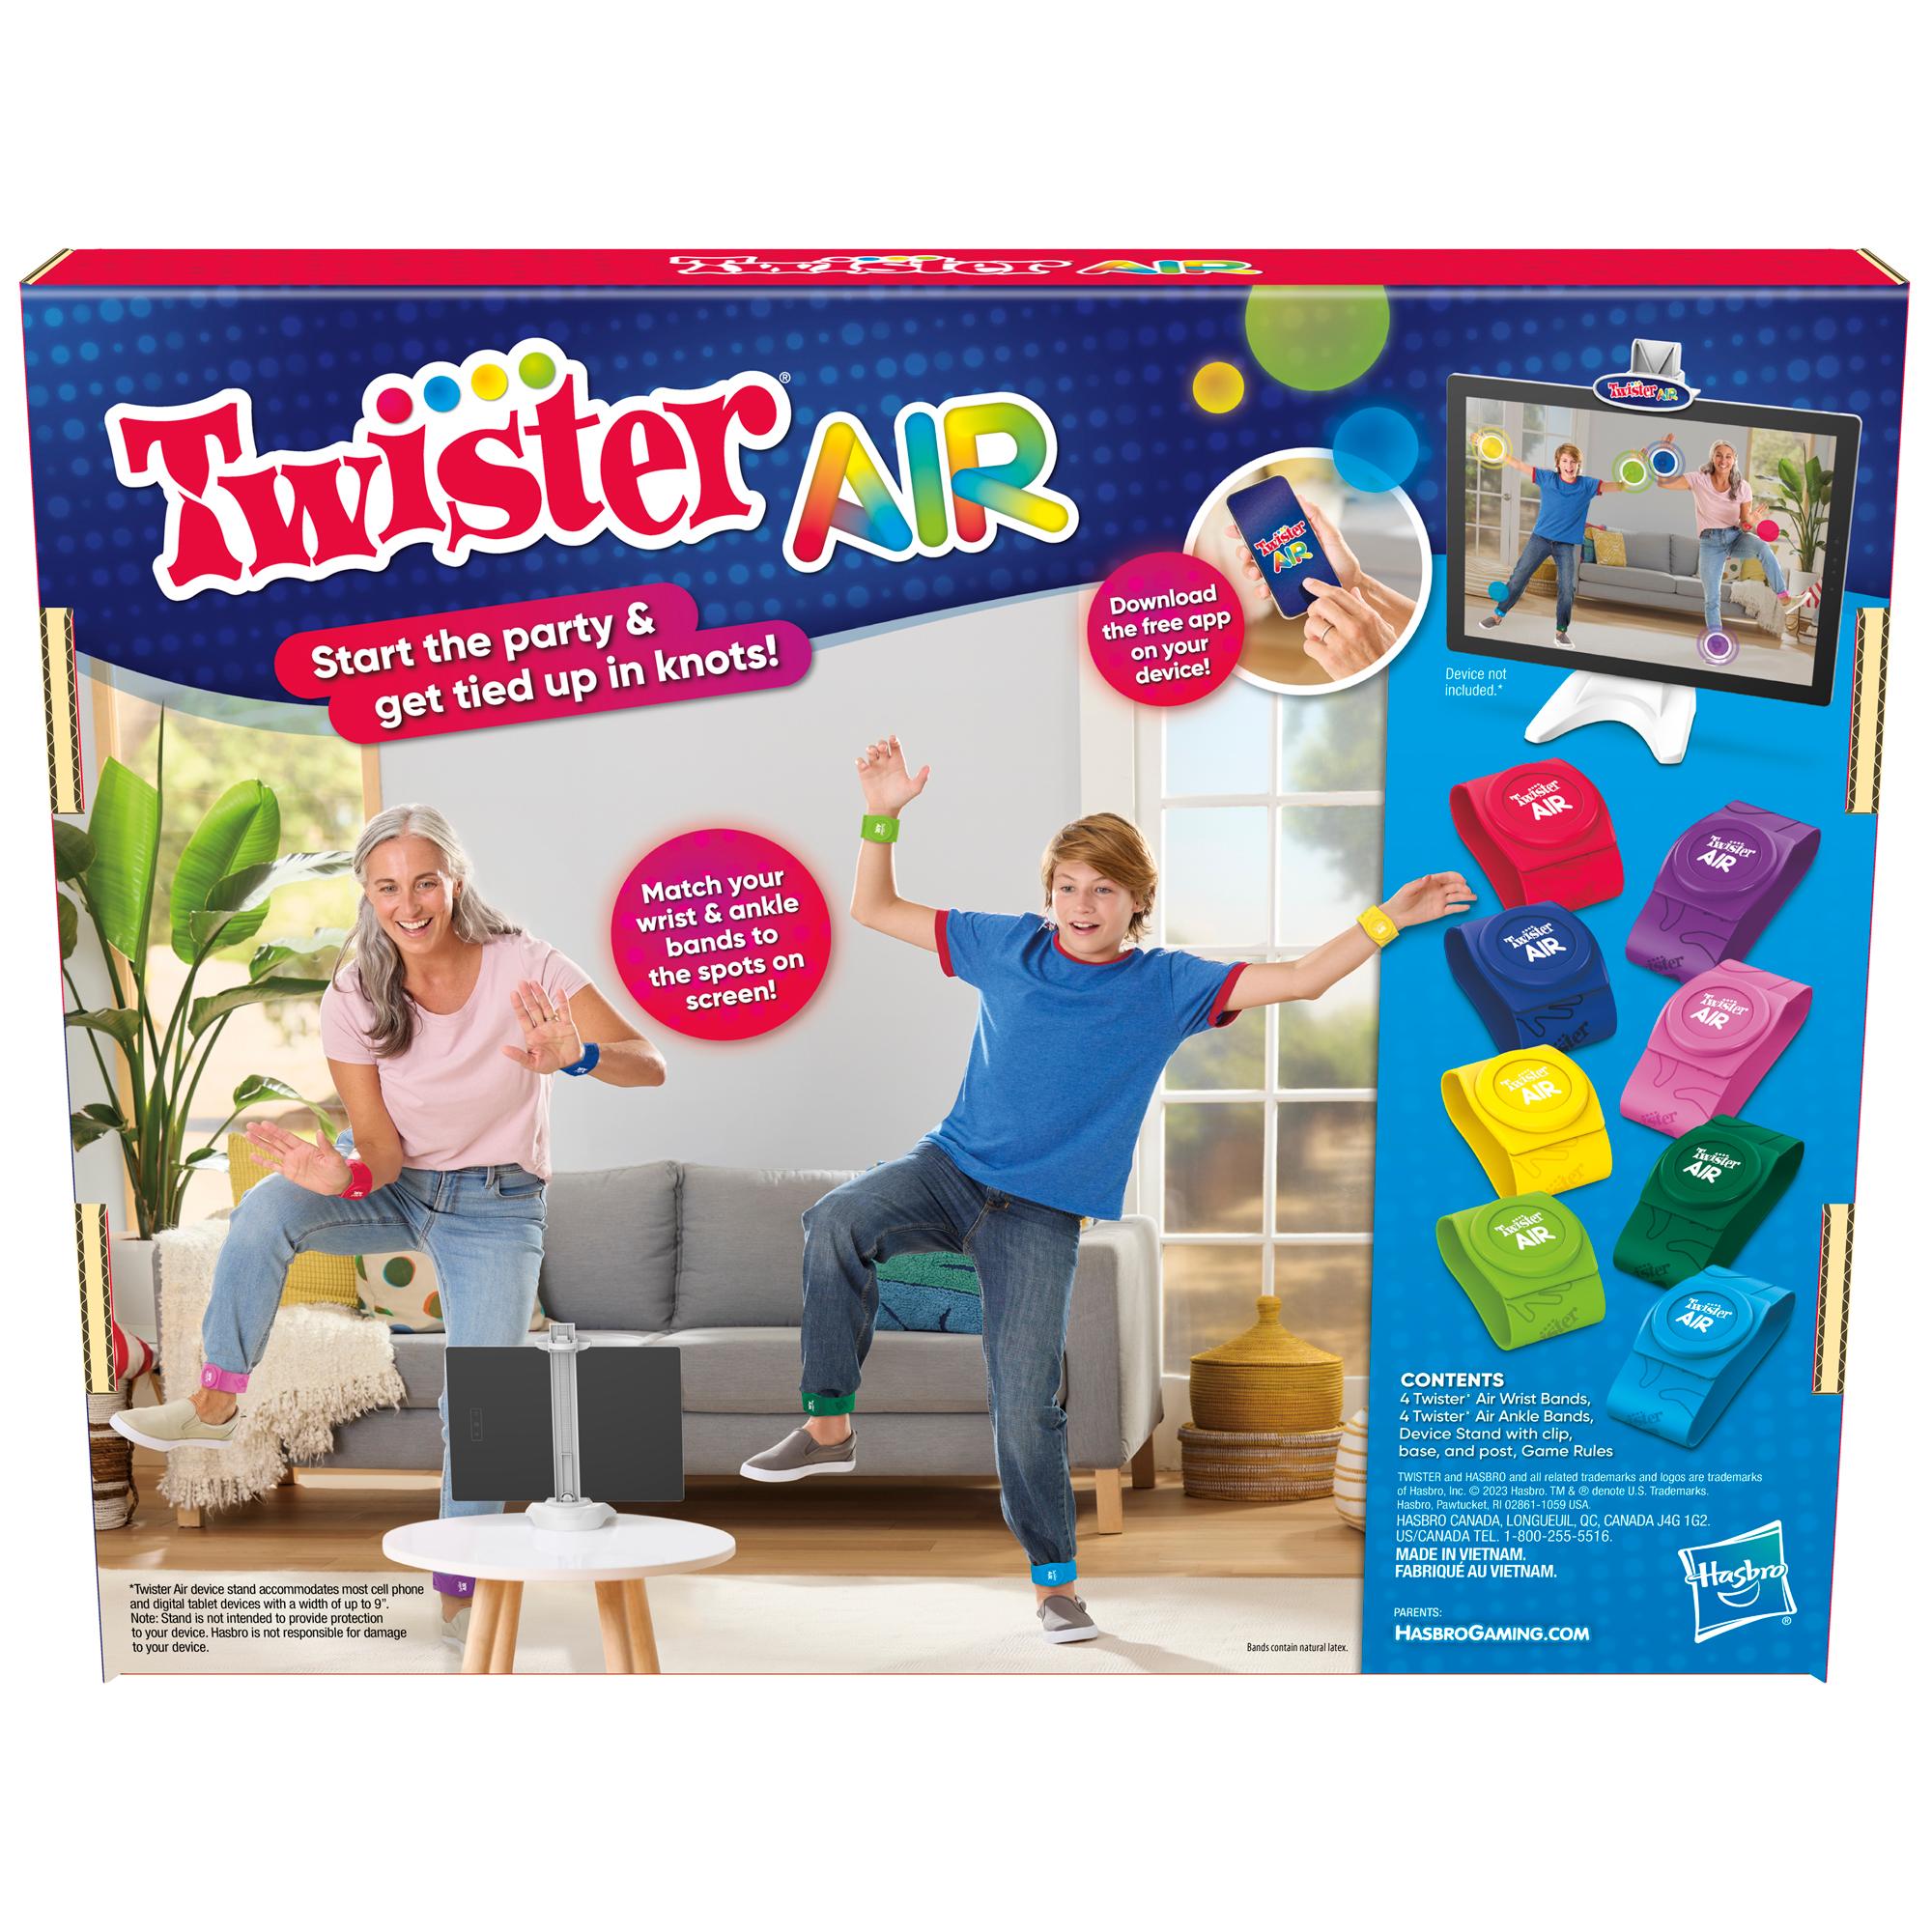 How long is Air Twister?